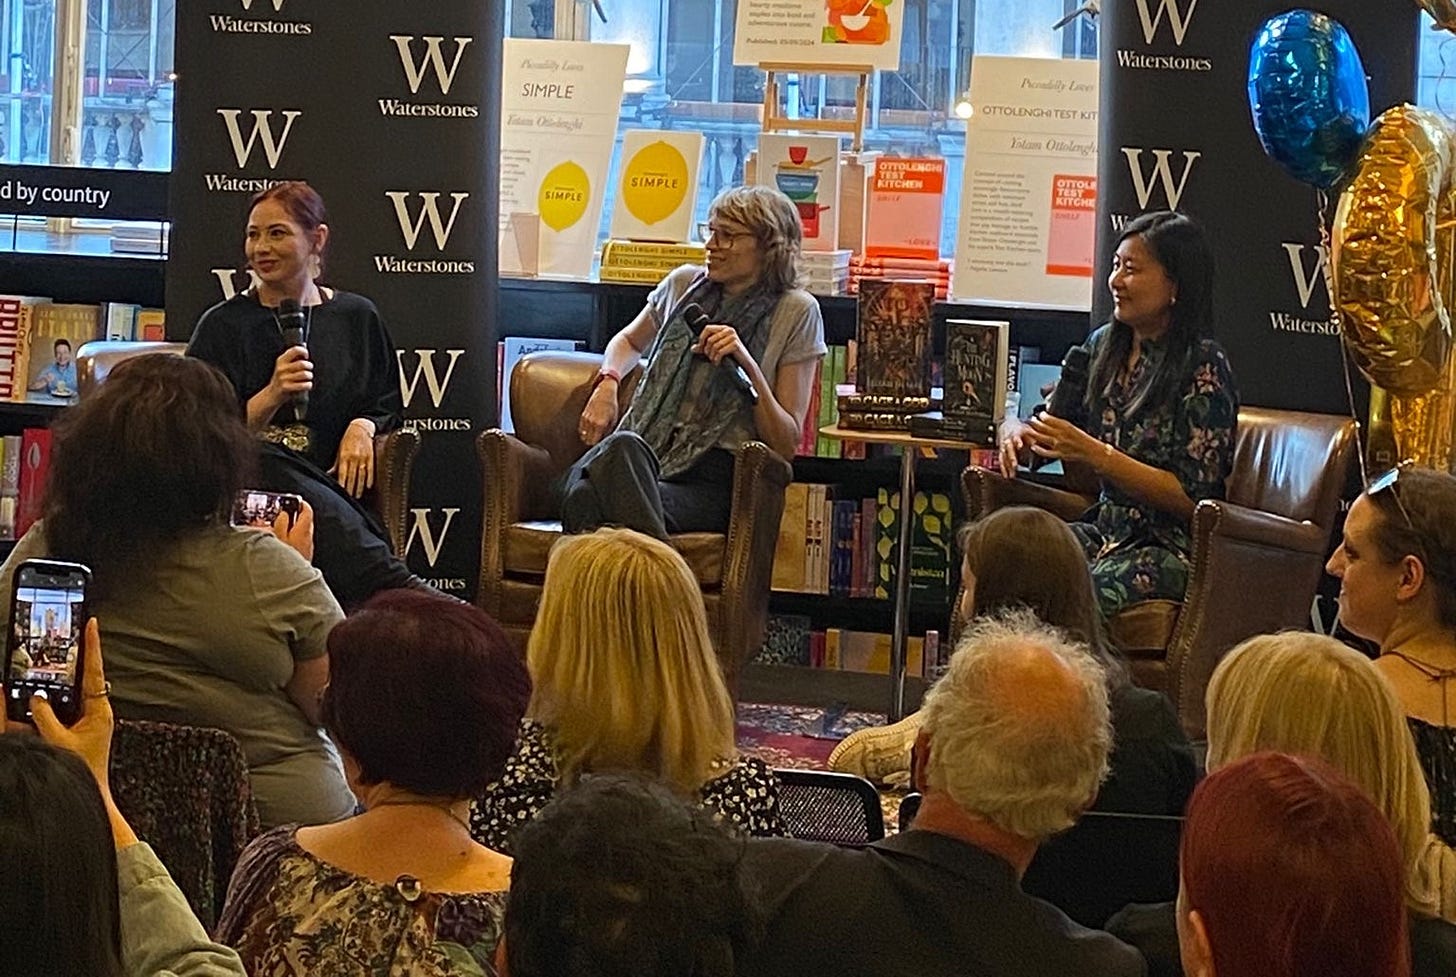 A photo of Sooz at an event with Elizabeth May and Daphne Tong, talking at the front of a packed room in Waterstones.